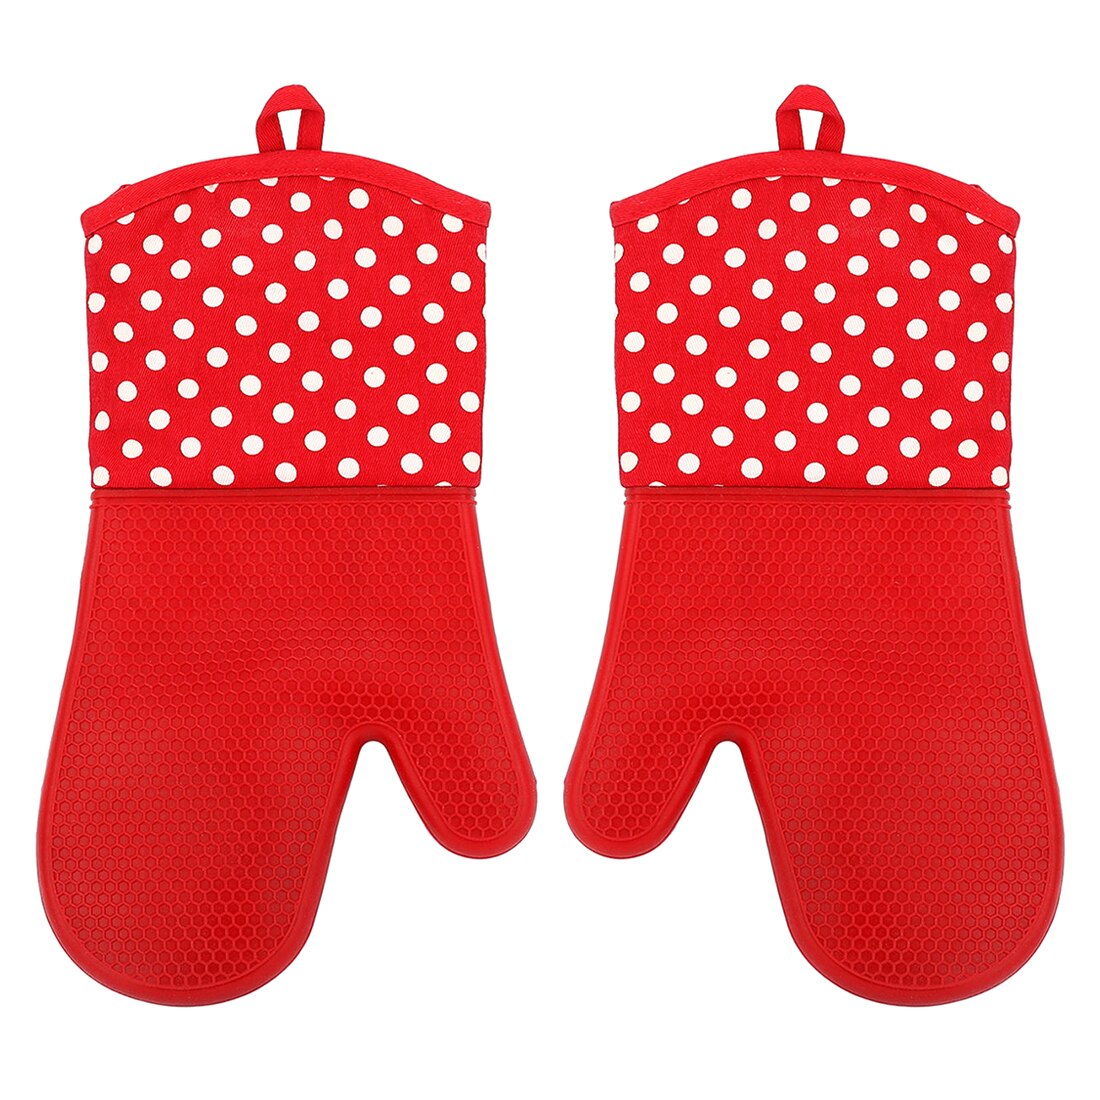 1 Pair Mitts Gloves Kitchen Tools Baking Microwave Oven Cooking Heat Resistant Silicone, Red